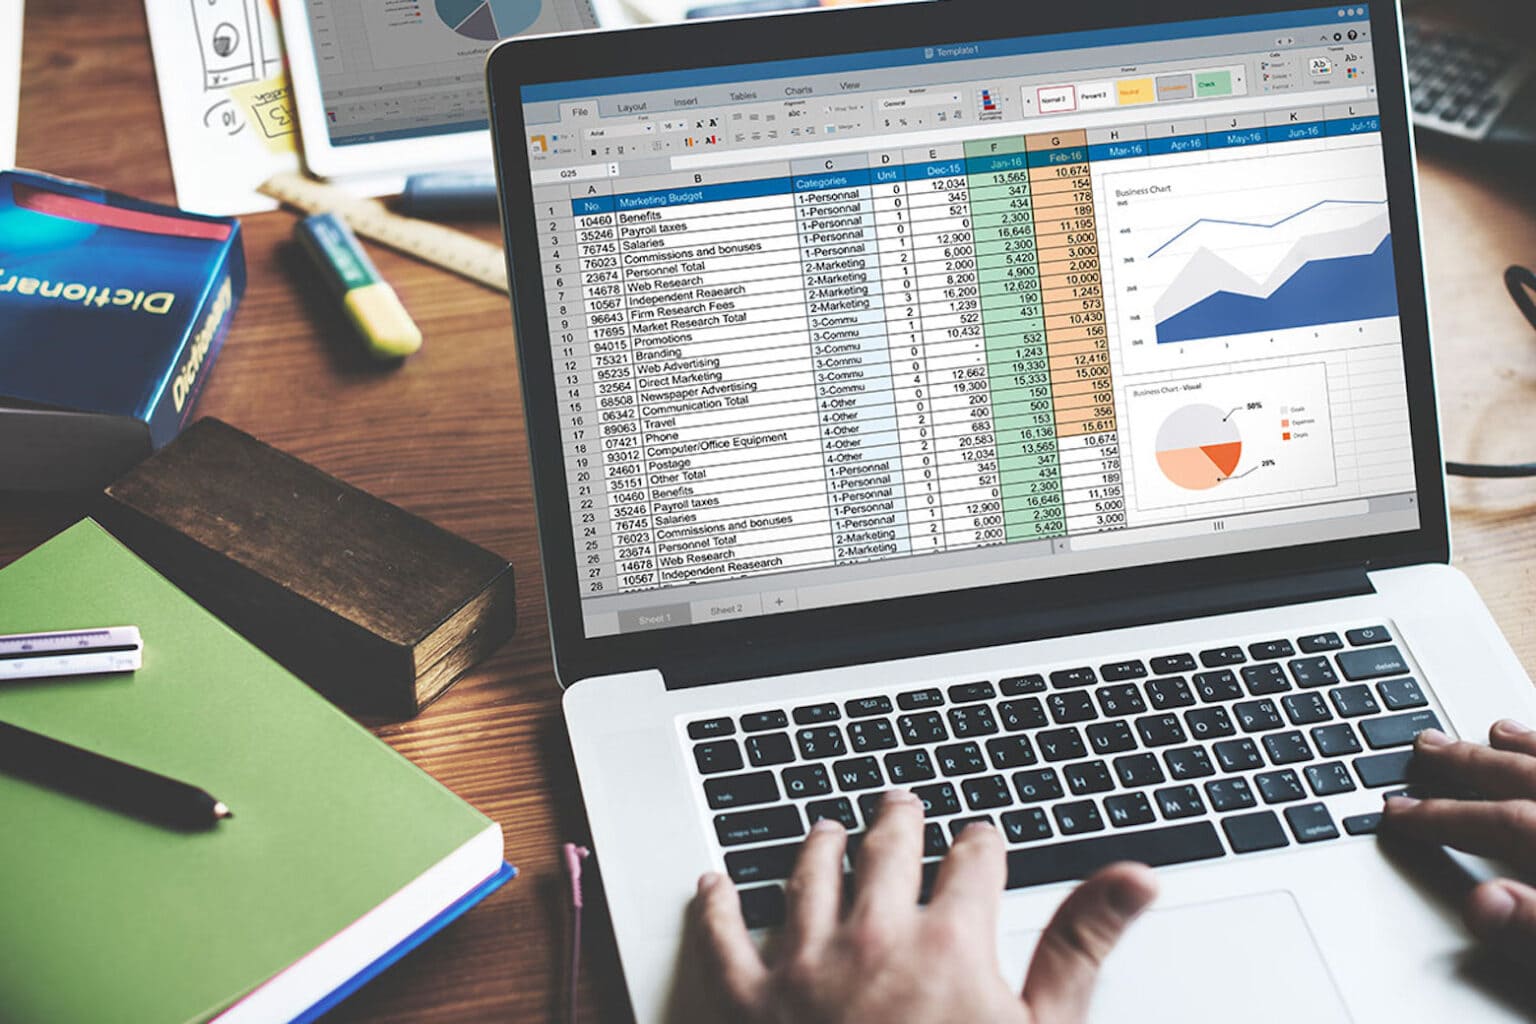 Become an Excel guru in under 15 hours for $10.